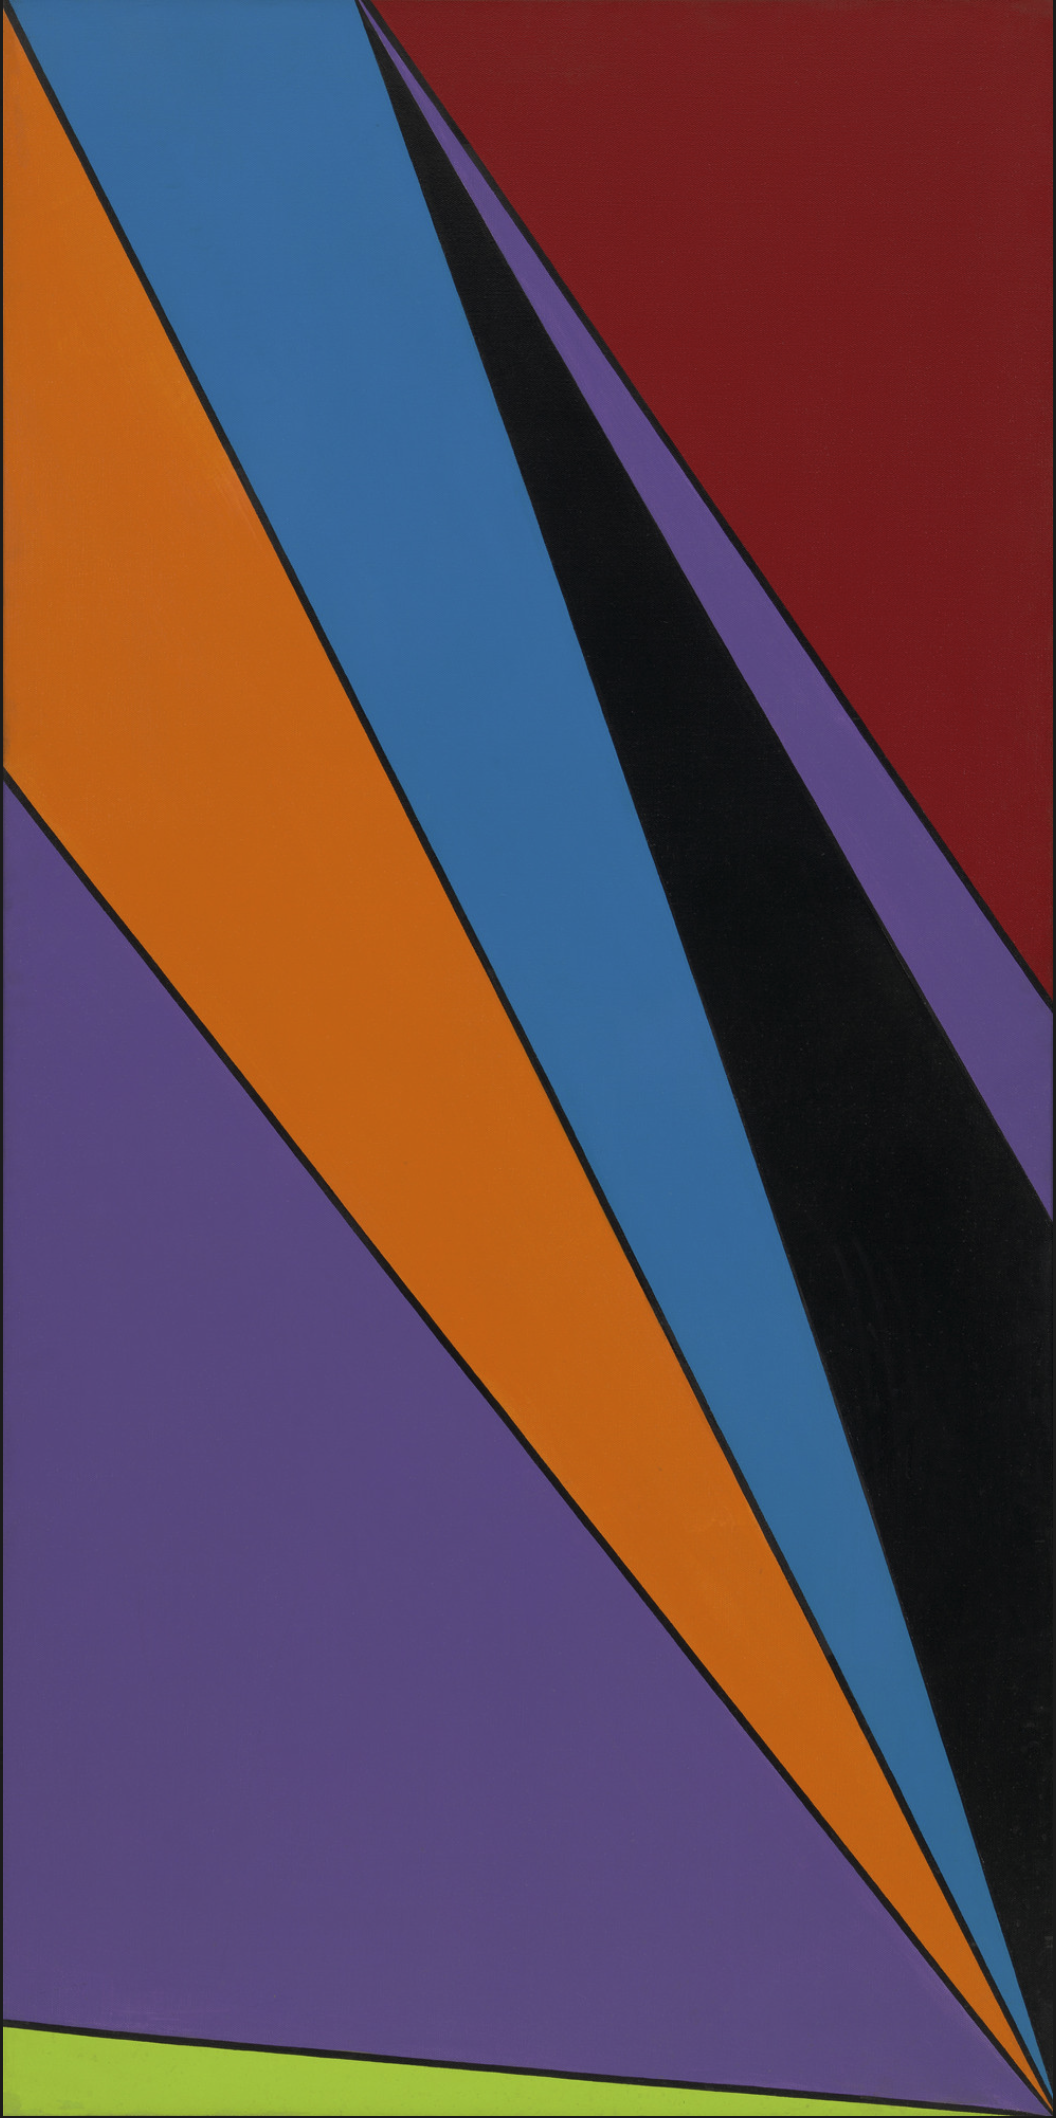  "Agriaki" by Olle Baertling, 1959, an abstract painting with a sharp diagonal composition using bold geometric shapes in red, blue, orange, purple, and black.